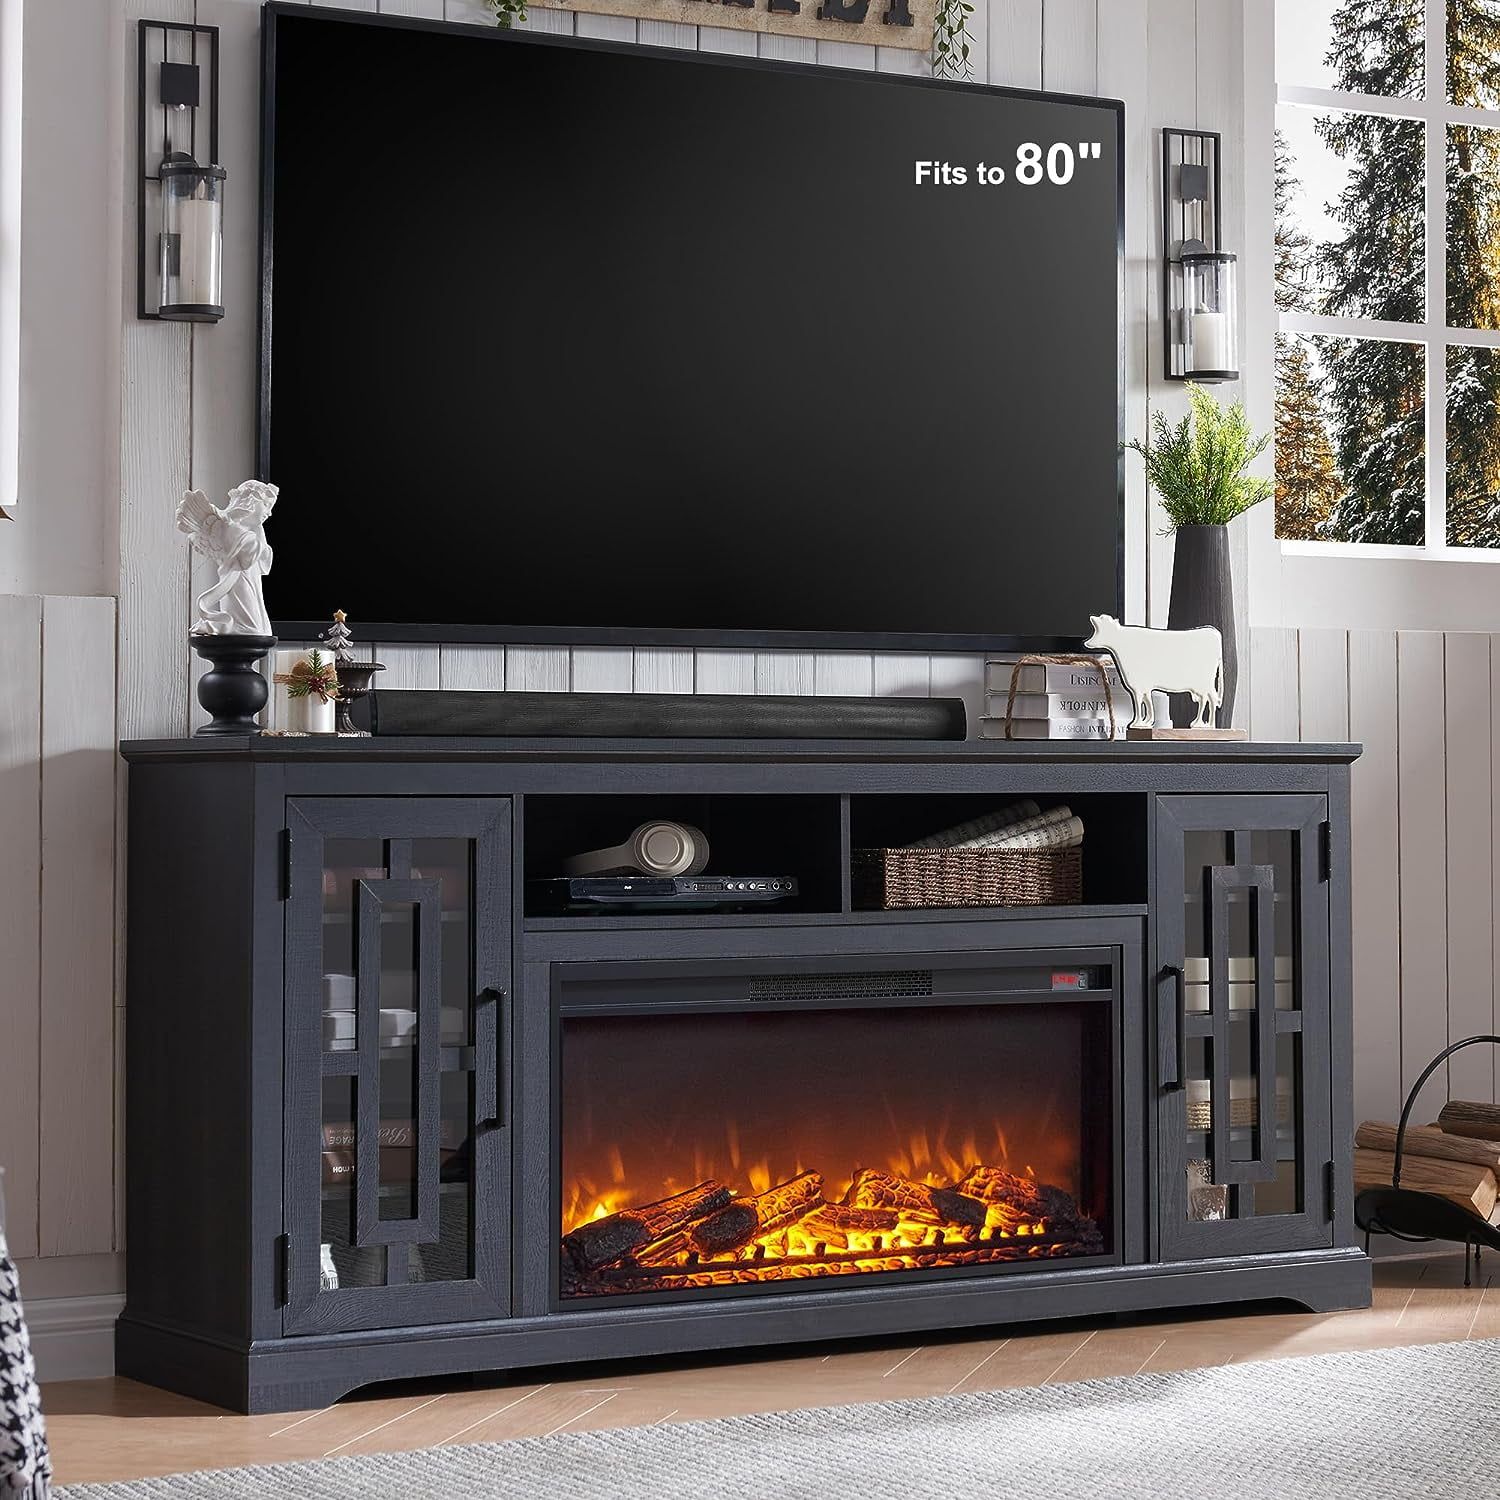 T4tream 70" Fireplace Tv Stand For 75 80 Inch Tv, Farmhouse Highboy  Entertainment Center For Living Room, Black – Walmart Throughout Wood Highboy Fireplace Tv Stands (View 3 of 15)